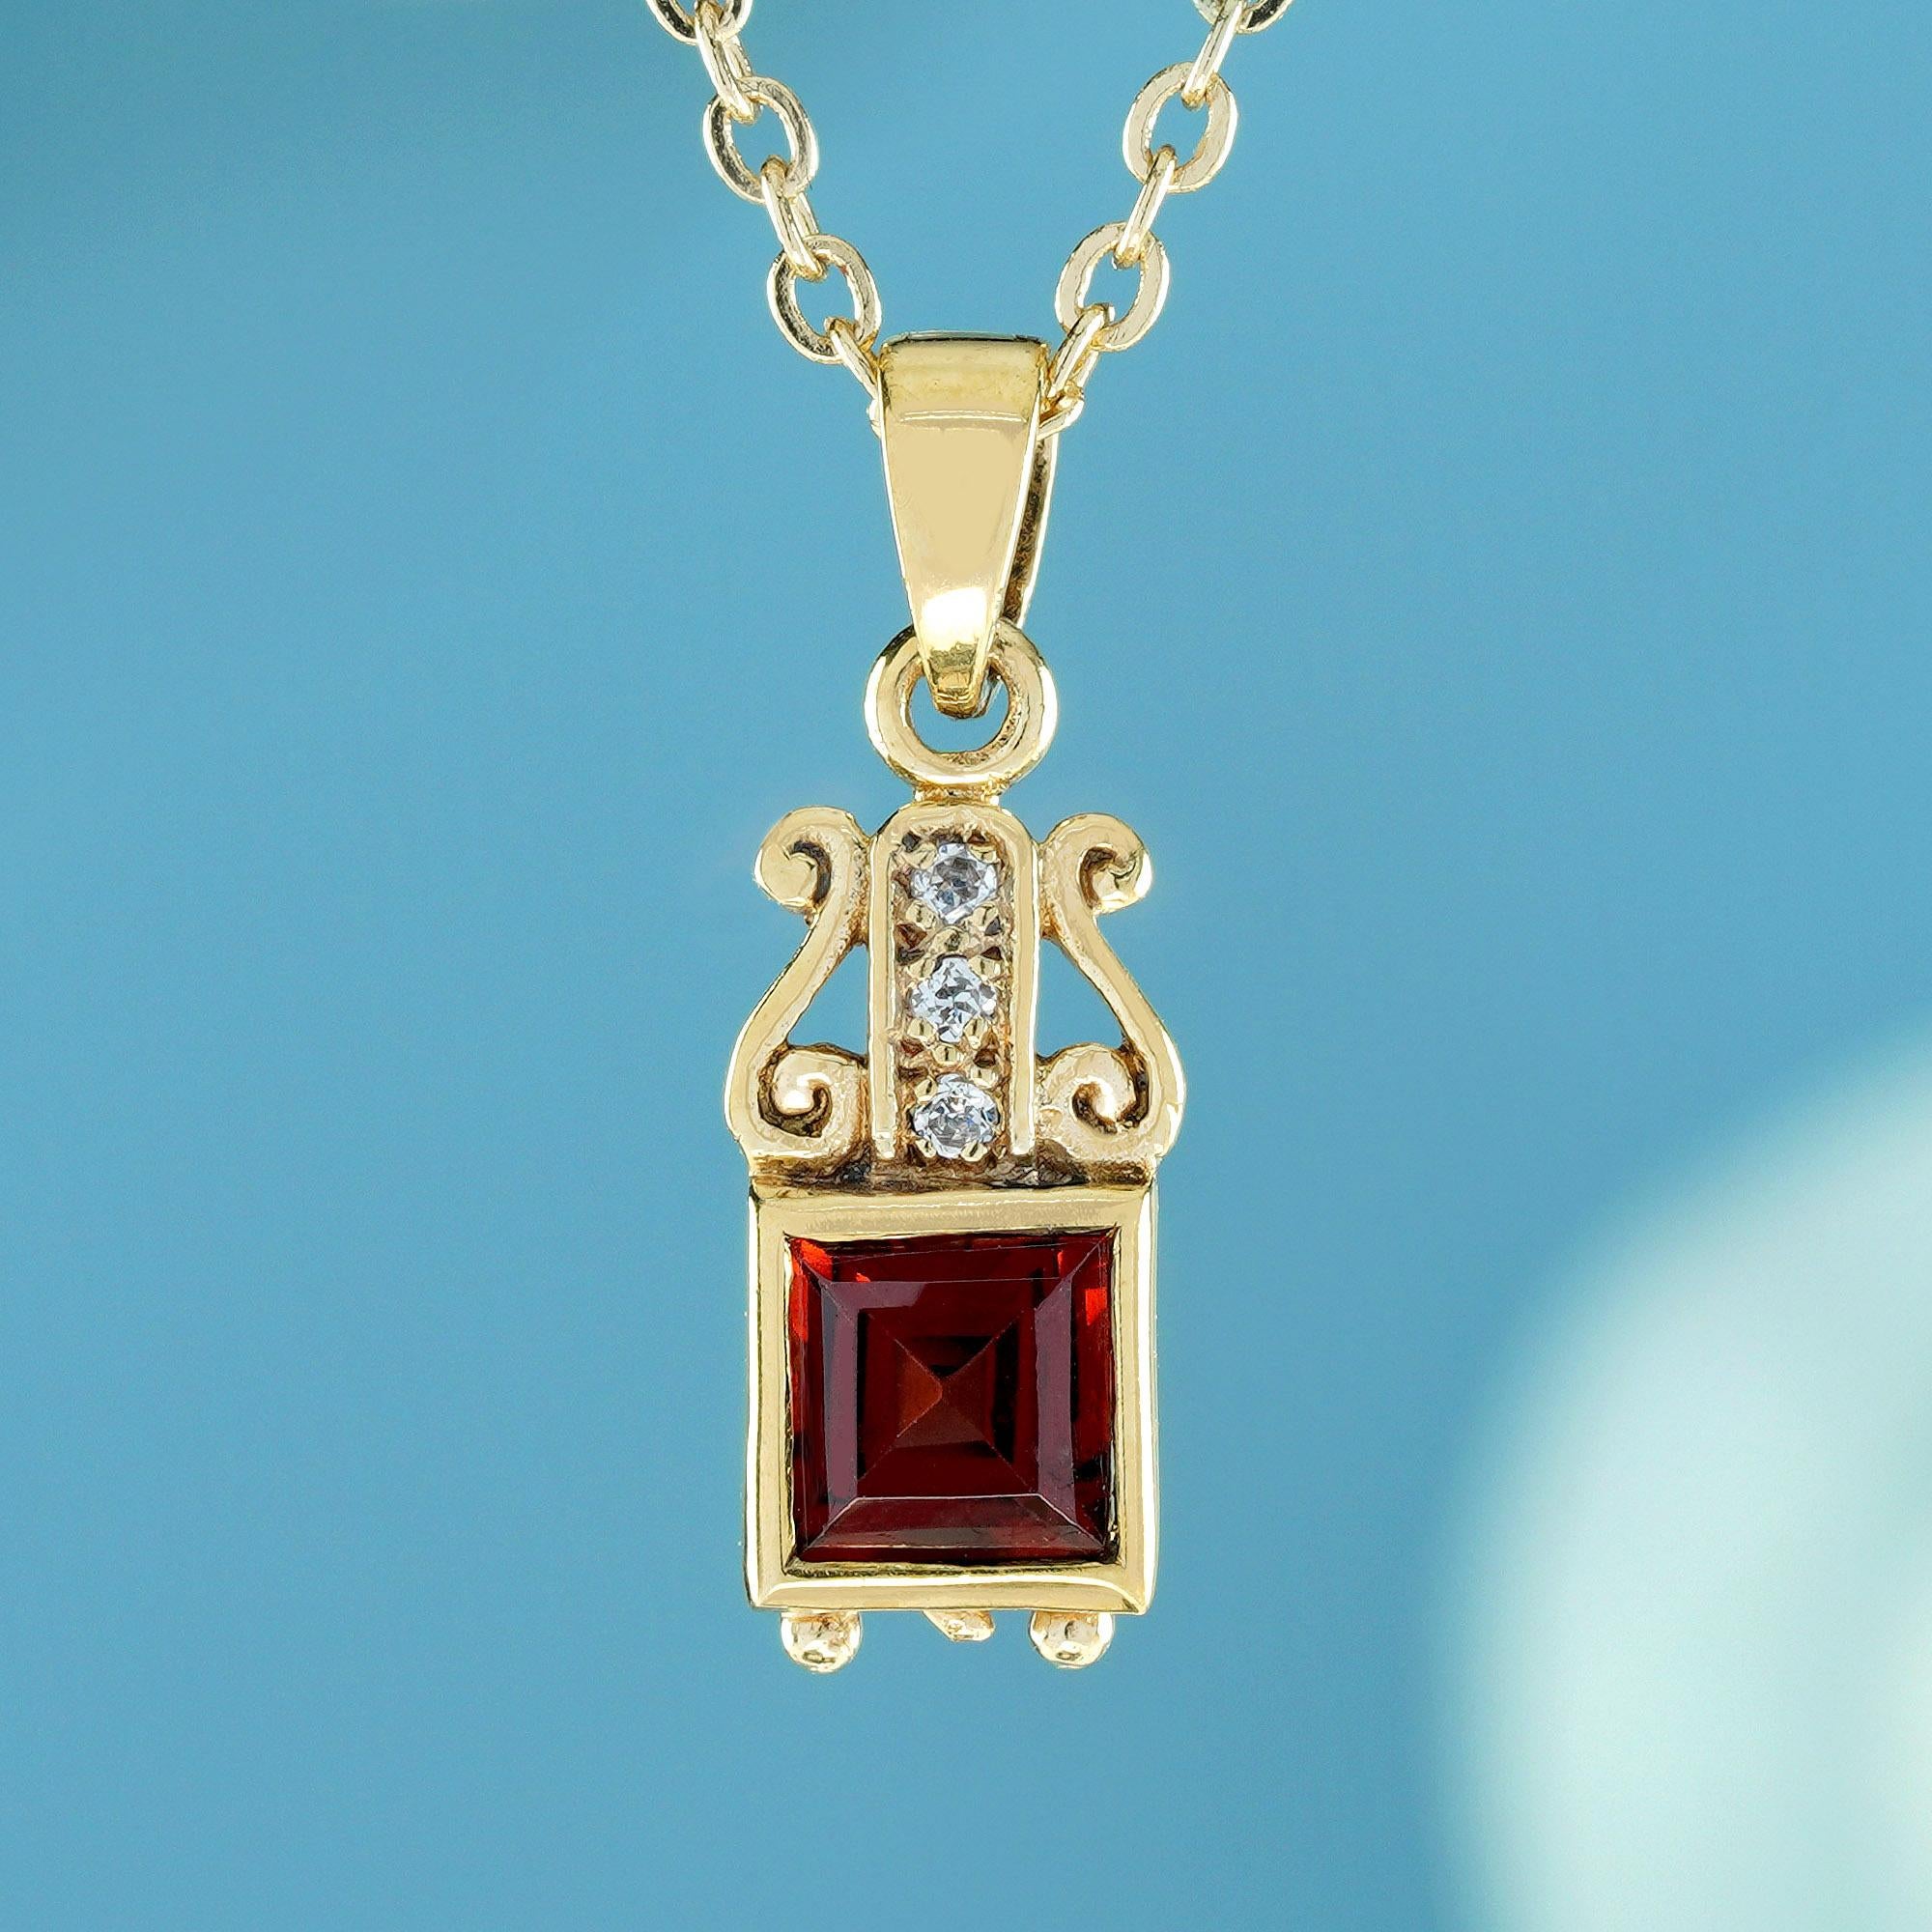 The pendant crafted from solid yellow gold, which gives it a warm, classic look. The delicate curved gold is set with cascade small round diamonds to create a sparkling line above the square-cut garnet set within a bezel setting, the garnet captures